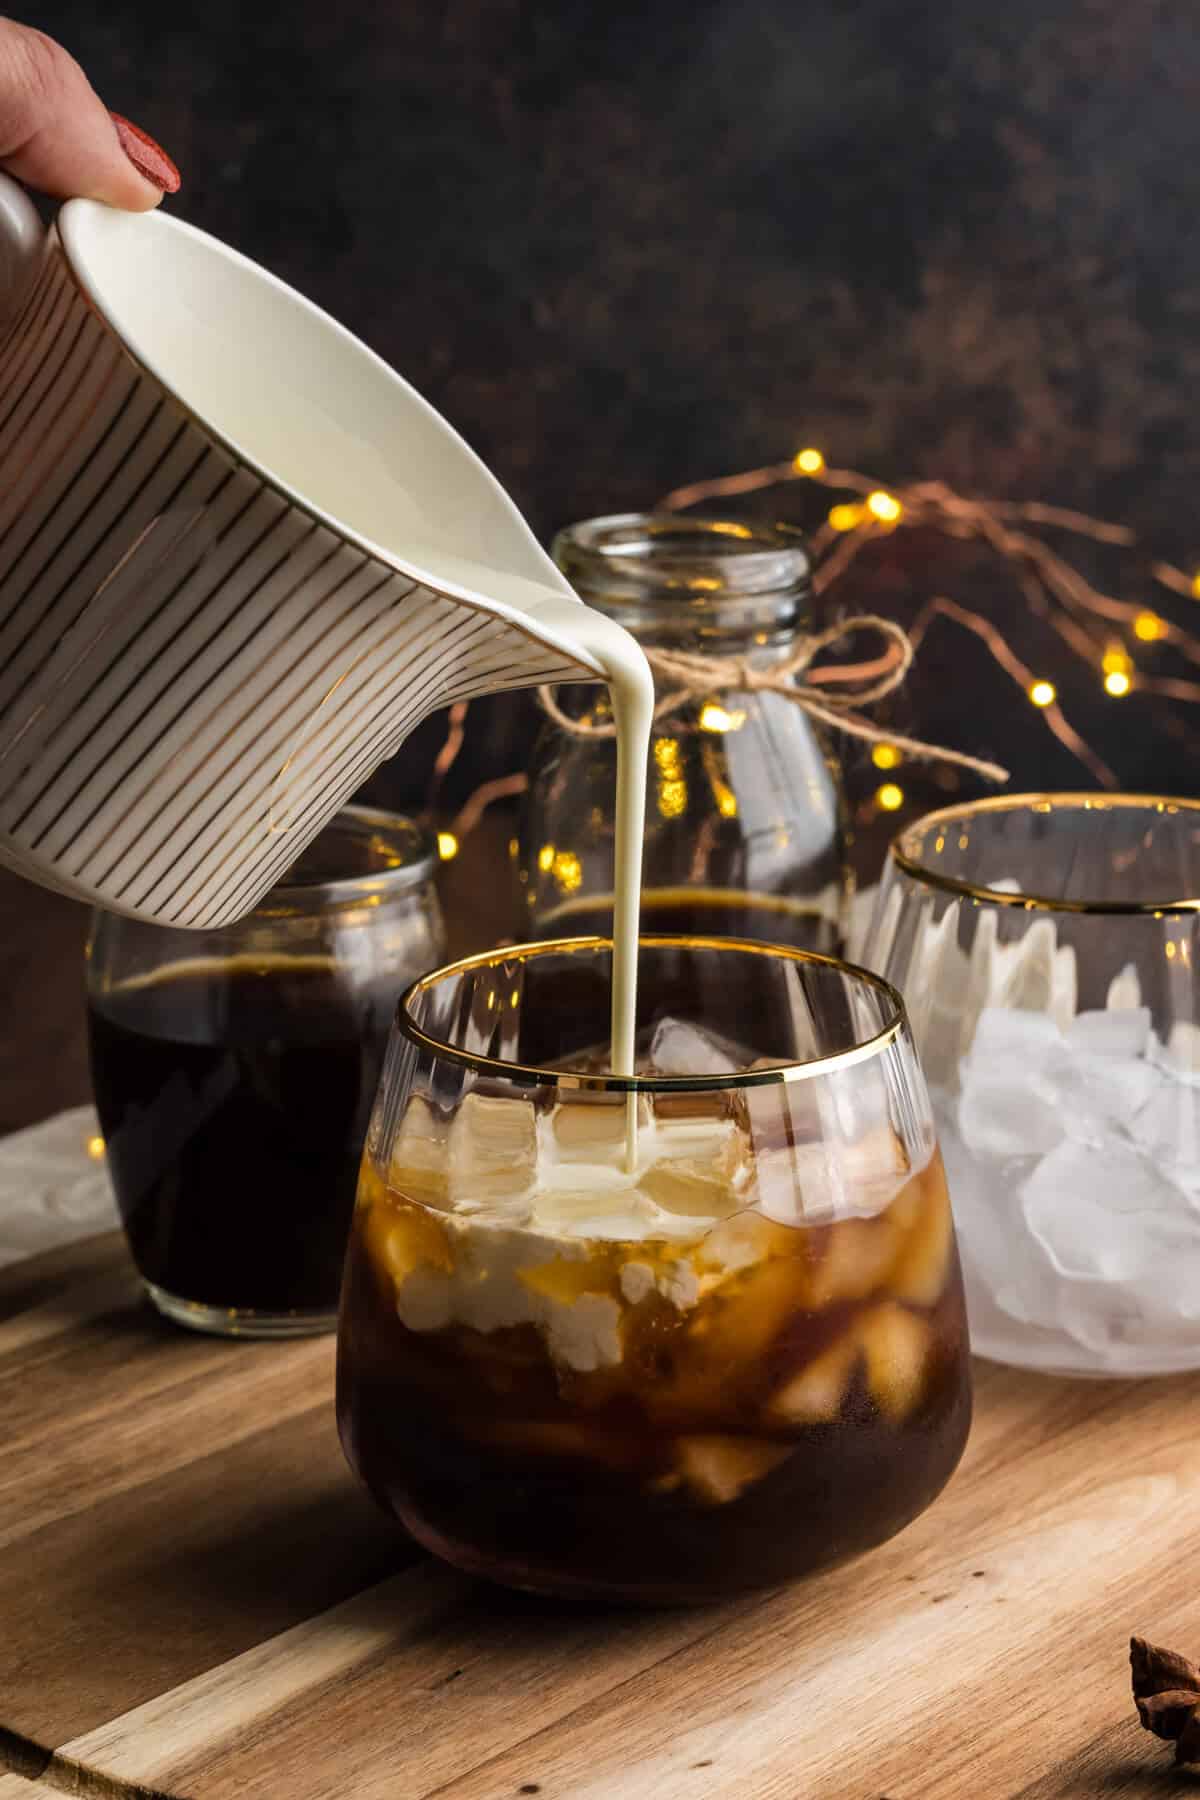 Heavy cream being poured into a cocktail glass containing coffee and gingerbread syrup.